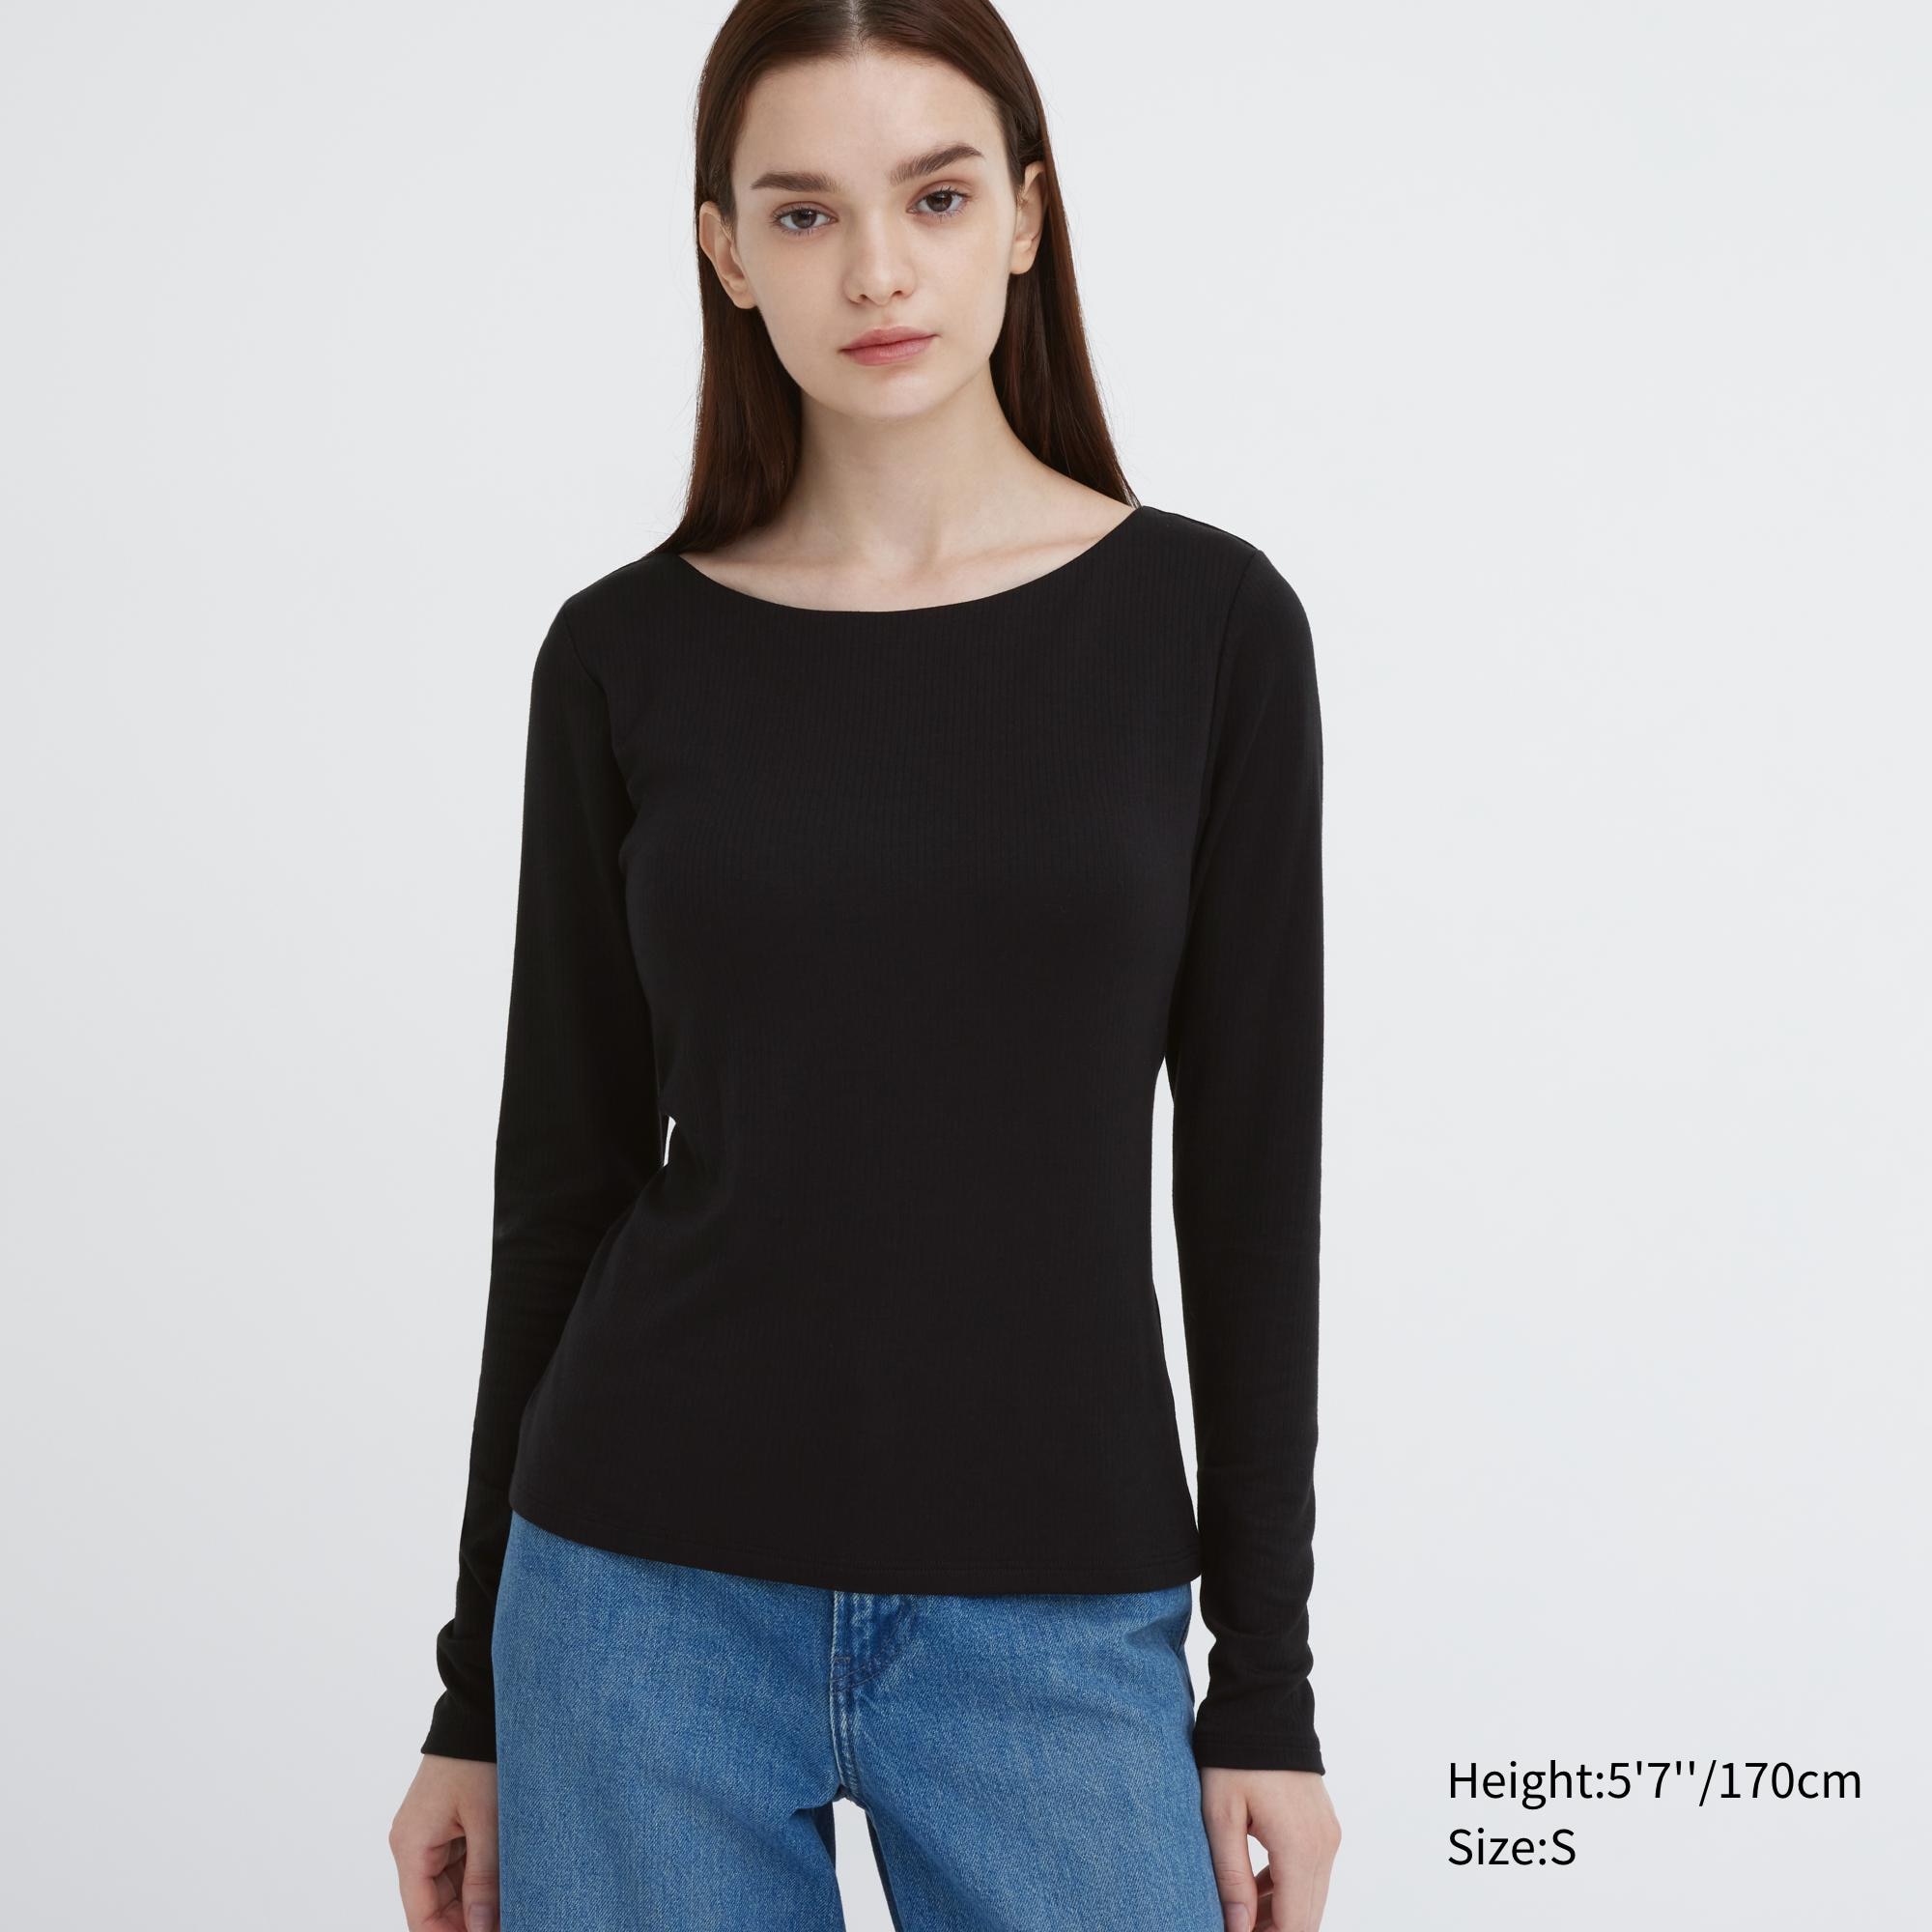 HEATTECH Ribbed Scoop Neck Long Sleeved Thermal Bra Top, UNIQLO EU